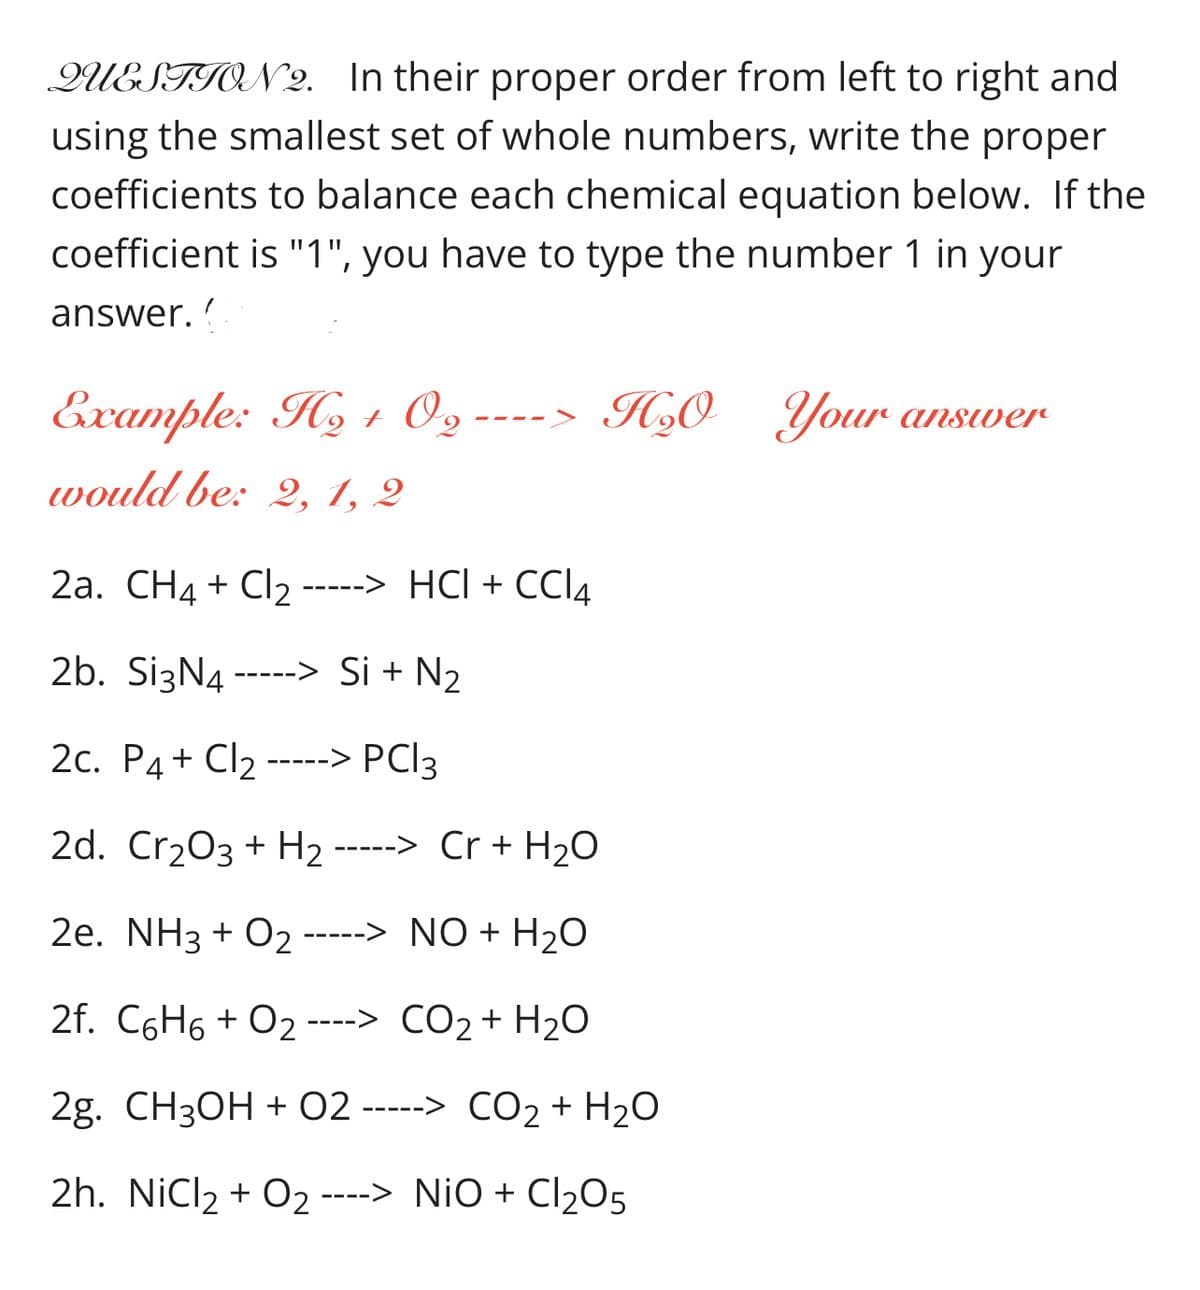 QUESTION 2. In their proper order from left to right and
using the smallest set of whole numbers, write the proper
coefficients to balance each chemical equation below. If the
coefficient is "1", you have to type the number 1 in your
answer. ?
Example: Hy 1 O,
O2-
H,0_Your answer
---- >
would be: 2, 1, 2
2а. CН4 + Cl2-----> HCІ + СС4
2b. SizN4 -----> Si + N2
2с. Р4+ Cl2-
-> PCI3
2d. Cr203 + H2 -----> Cr + H2O
2e. NH3 + O2 -----> NO + H2O
2f. C6H6 + O2 ----> CO2+ H2O
CO2 +
2g. CH3ОН + 02 -----> СО2+ H20
2h. NiCl2 + O2 ----> NiO + Cl205
